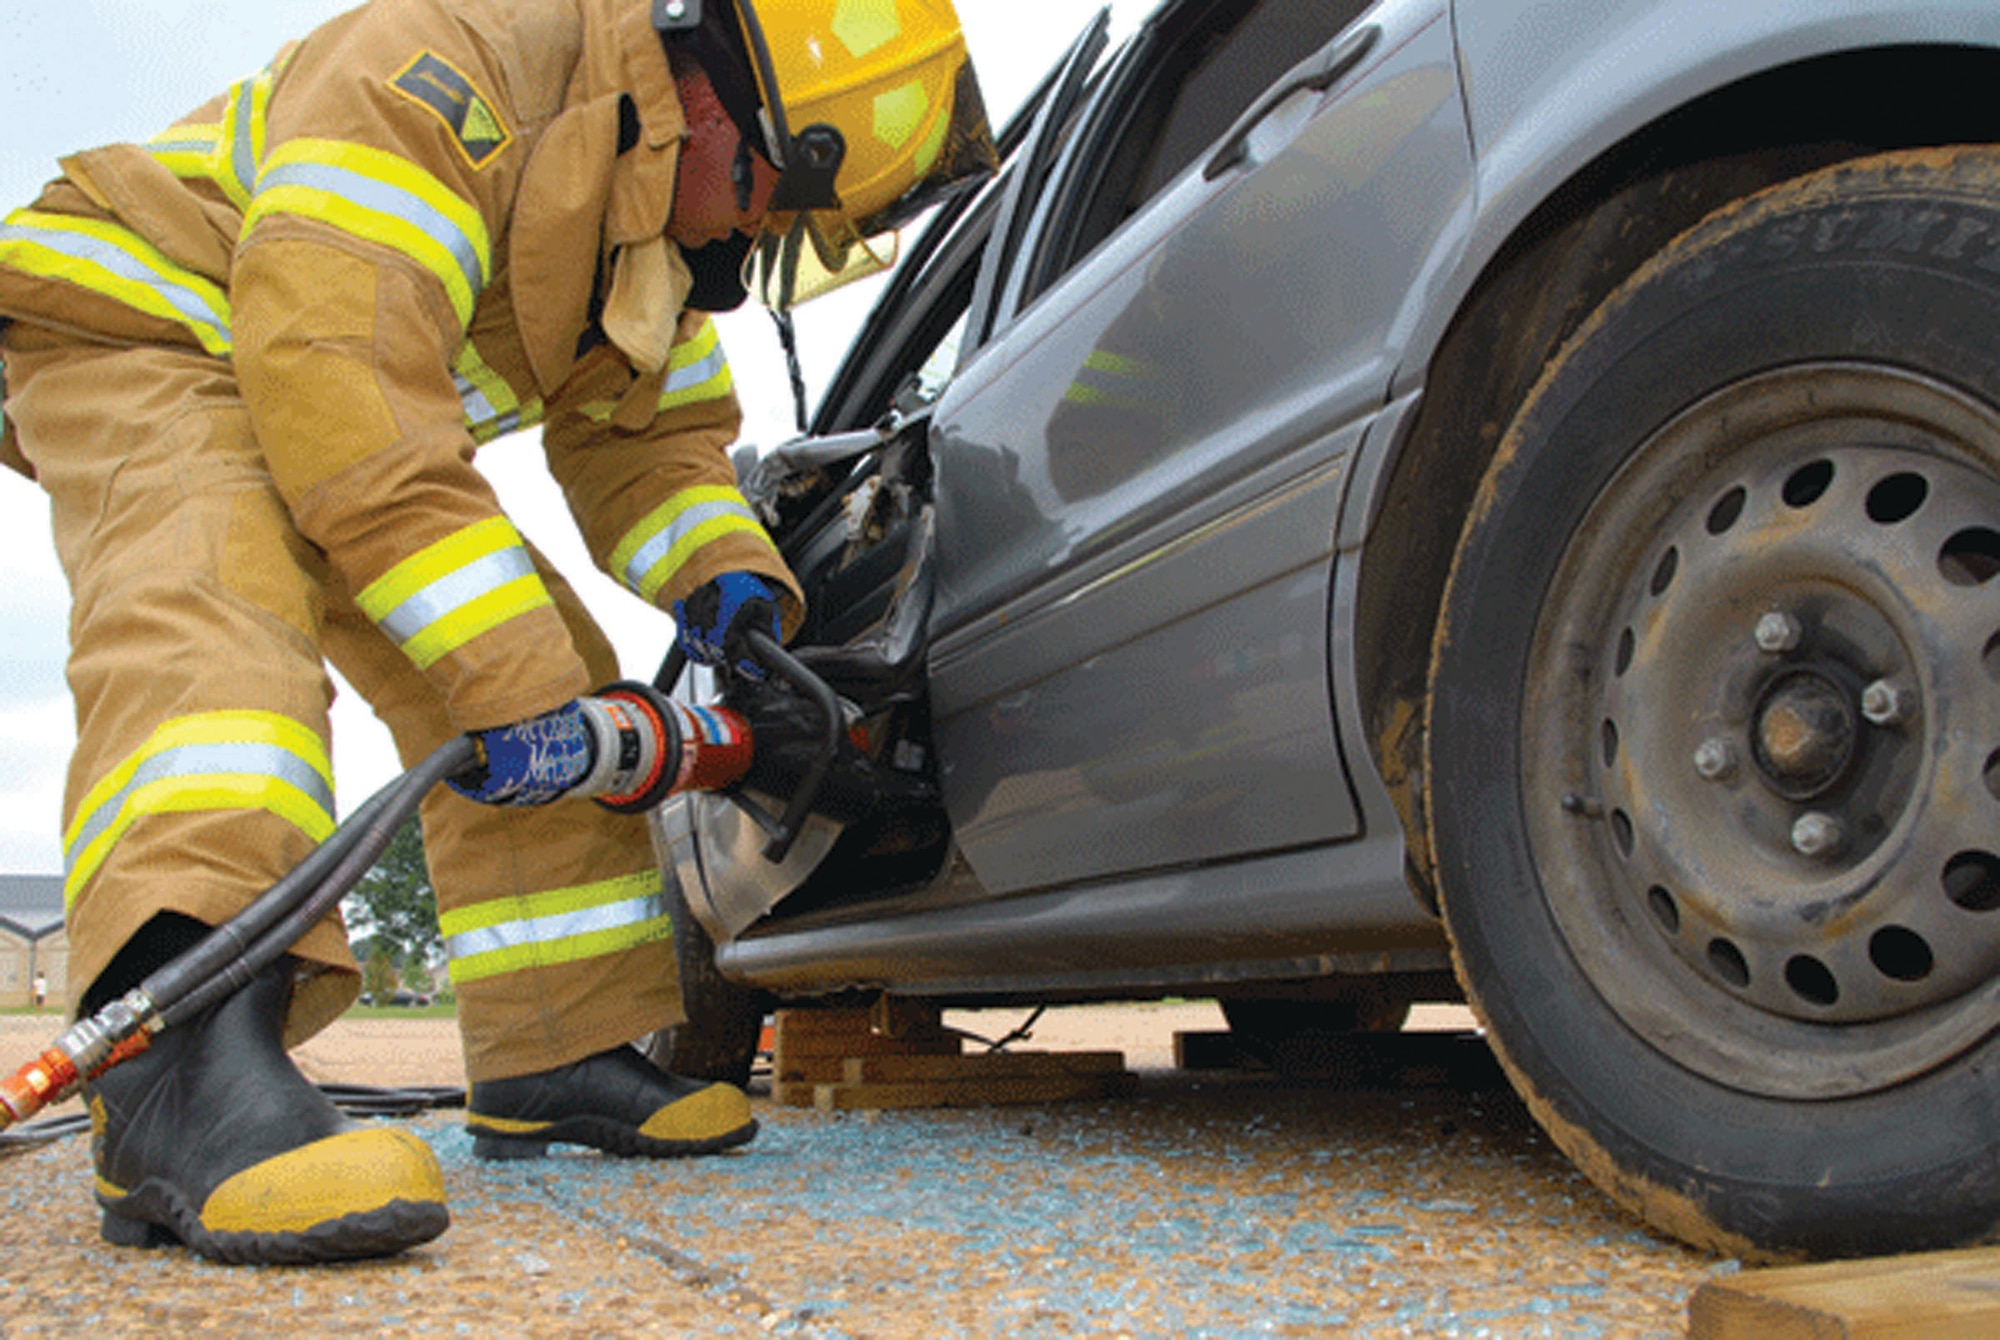 A Maxwell-Gunter firefighter uses the "jaws-of-life" tool to open a car door during a simulated automobile accident at Gunter. The accident was part of the base's May HURICON exercise that involved preparation for bad weather and evacuees from a gulf-coast hurricane. (U.S. Air Force photo/Jamie Pitcher)